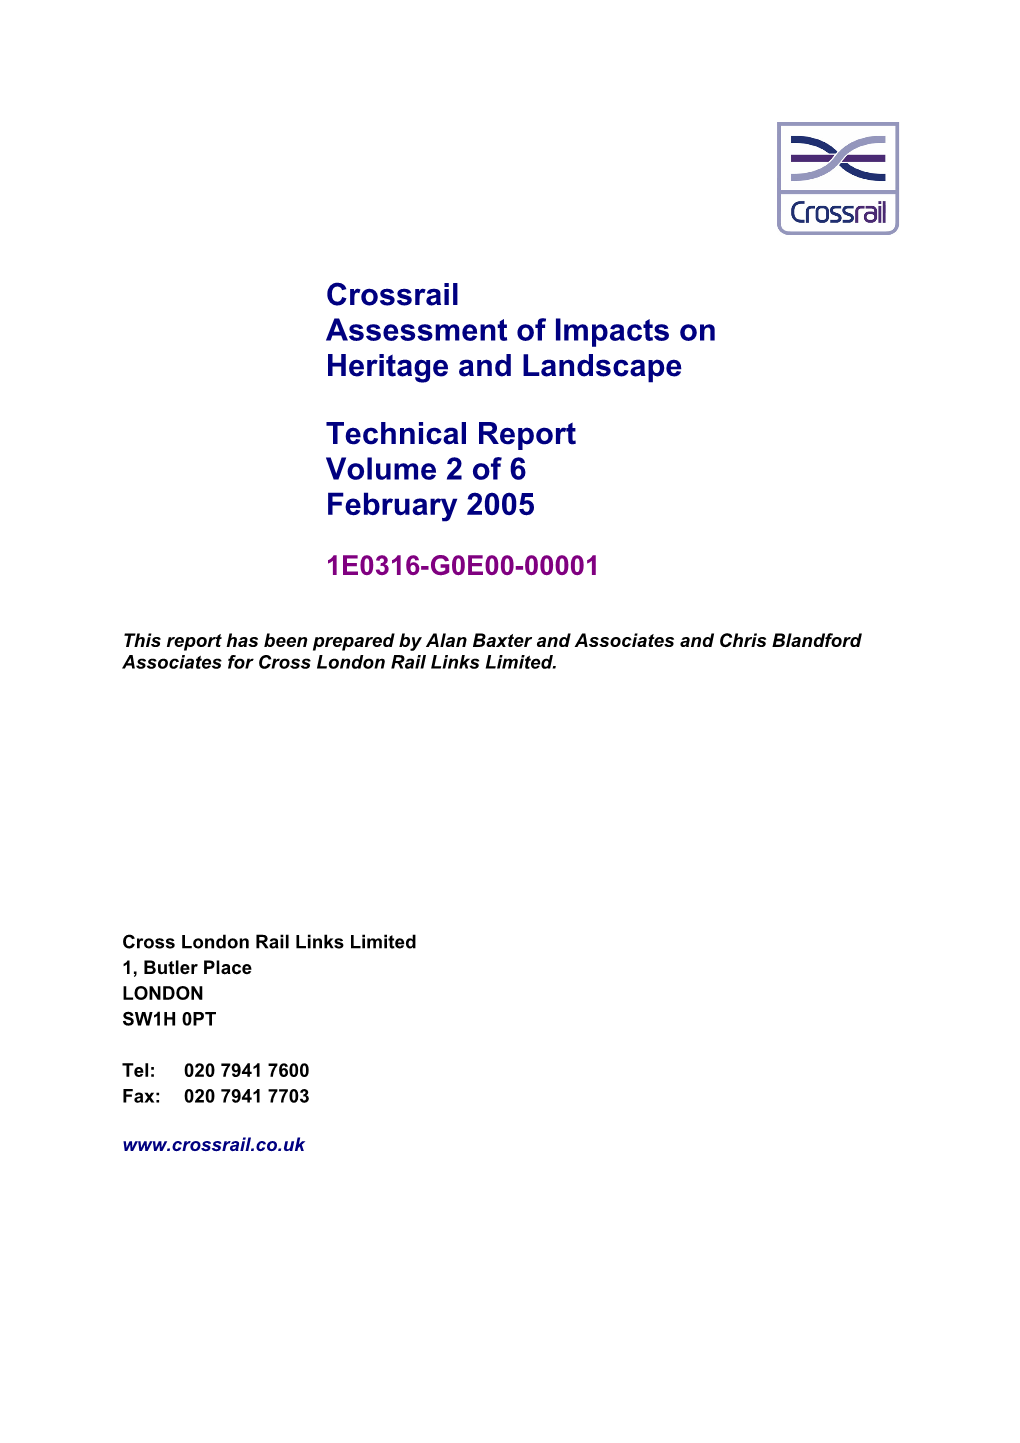 Crossrail Assessment of Impacts on Heritage and Landscape Technical